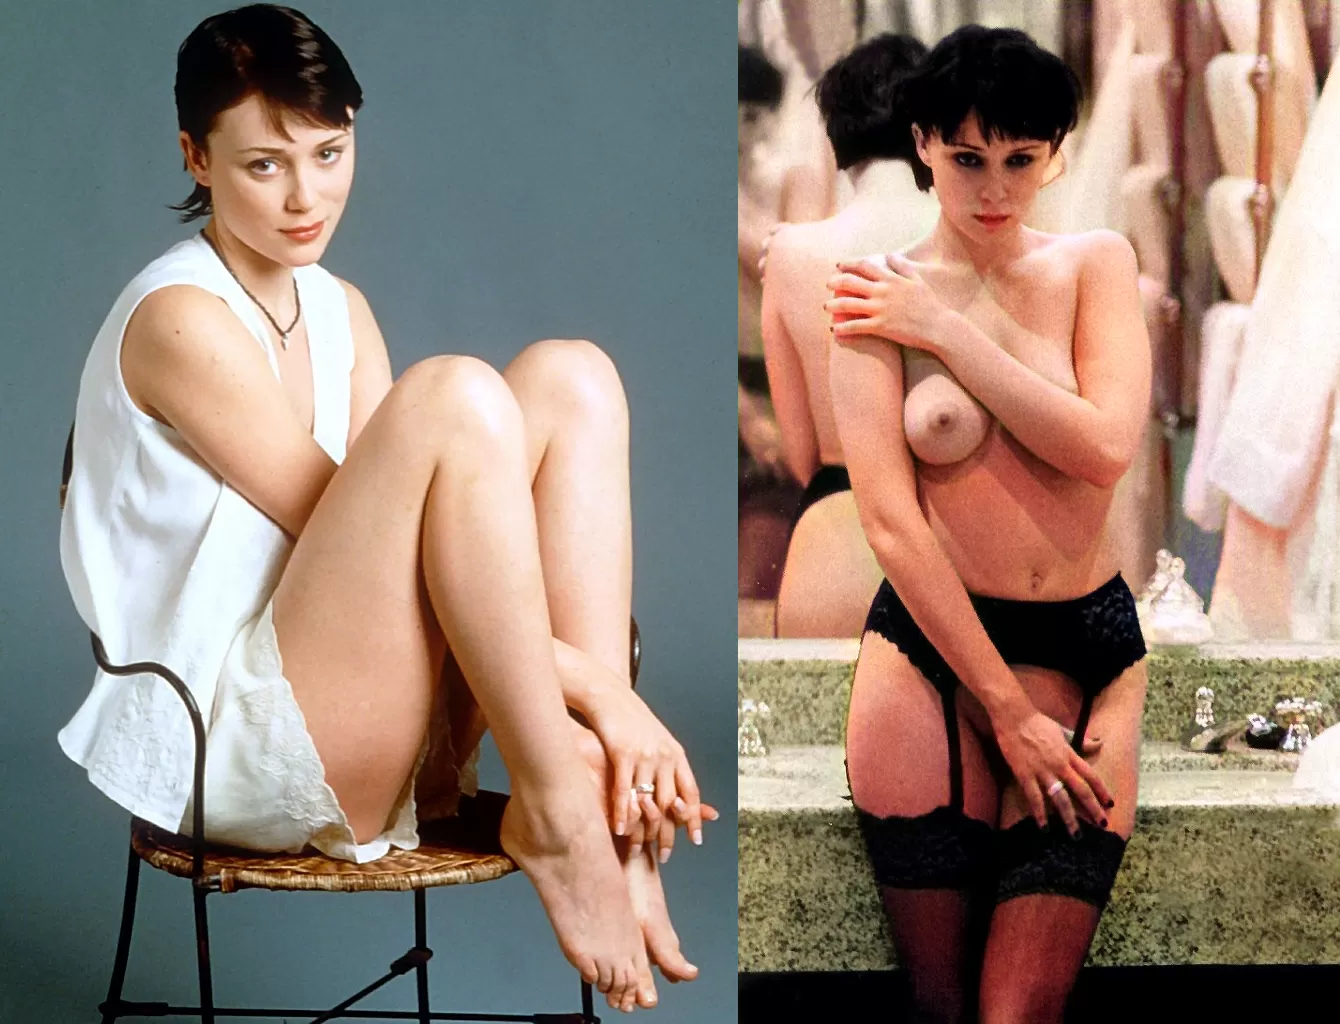 Watch keeley hawes 2000 nudes in NostalgiaFapping www.asspictures.org.